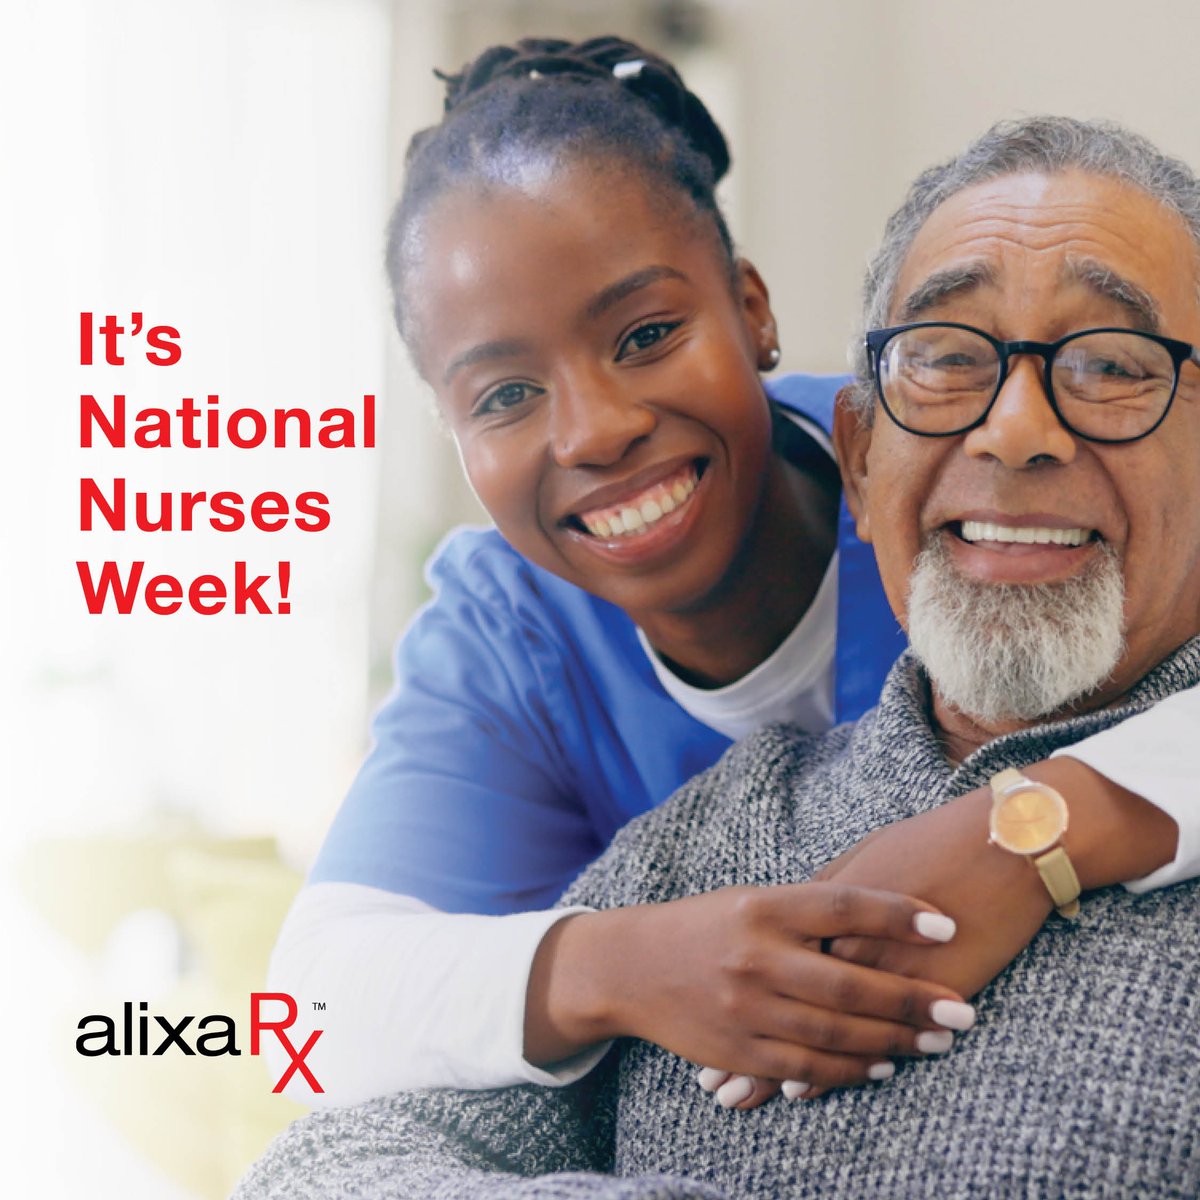 AlixaRx streamlines pharmacy-related tasks and allows nurses to focus on providing the best possible care to patients.

Learn more:
AlixaRx.com

#AlixaRx #PatientCentered #PharmacyServices #NursesWeek